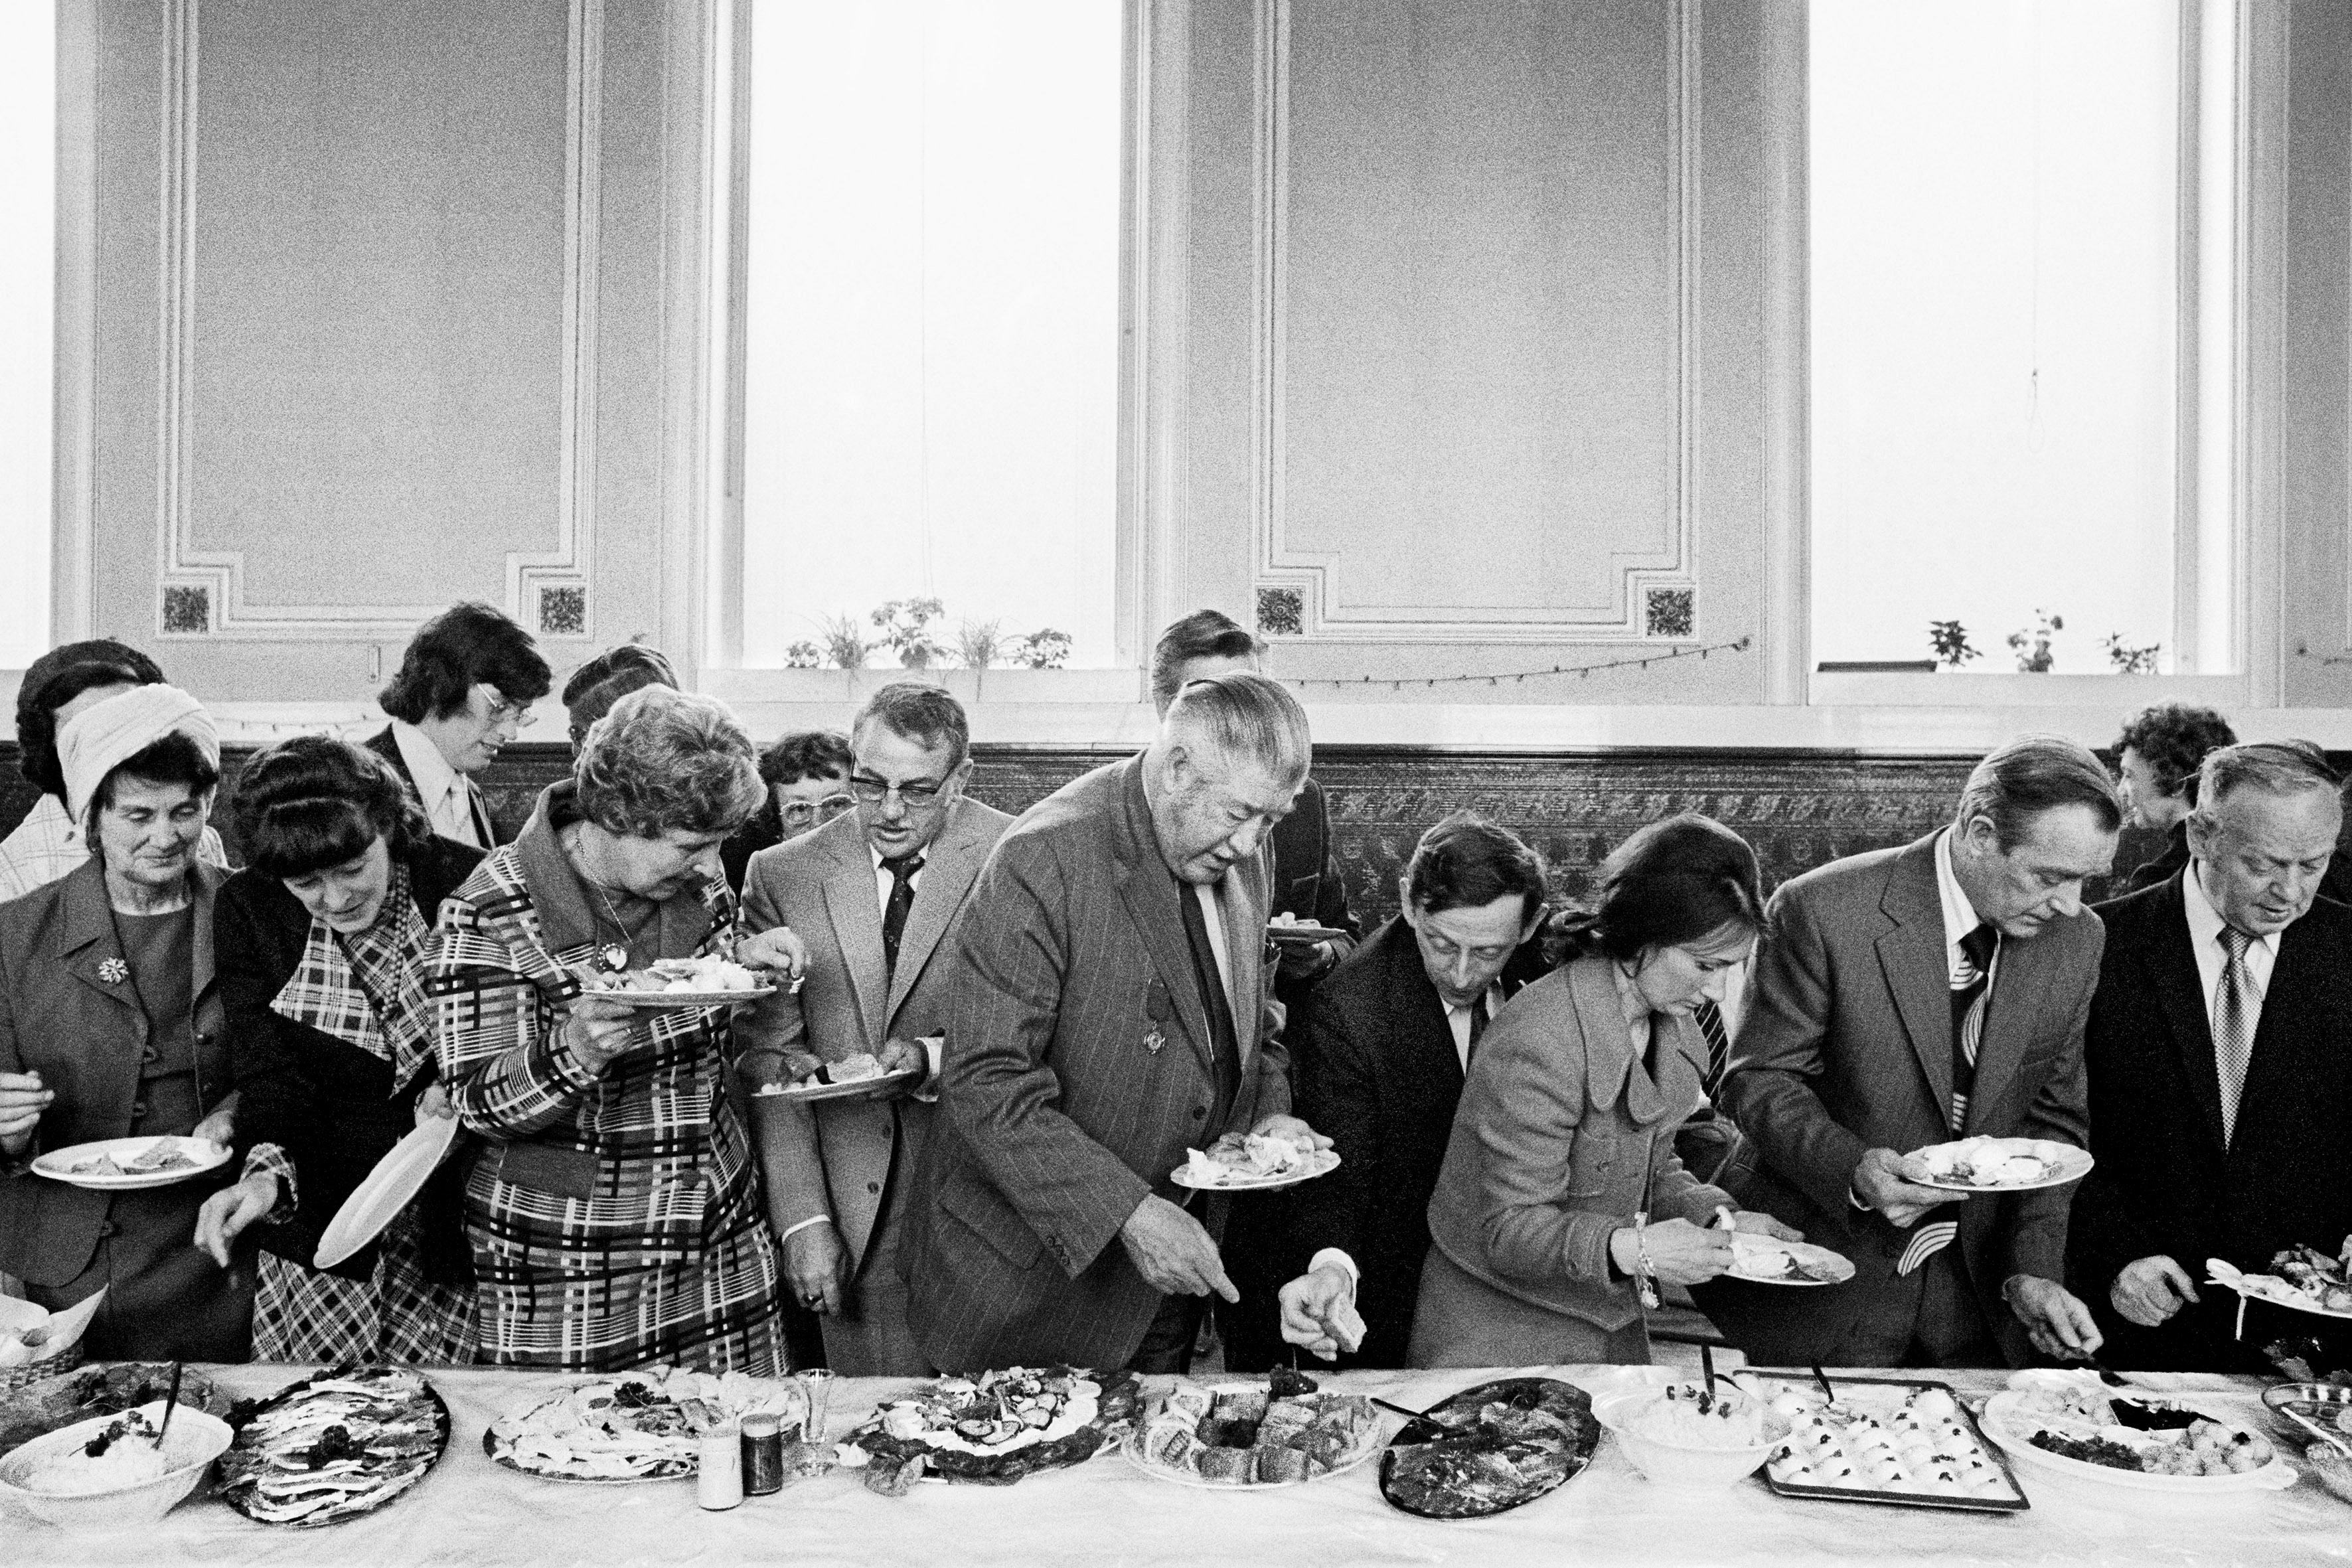 Martin Parr, "Mayor of Todmorden's inaugural banquet," 1977. Courtesy of Magnum Photos and Rocket Gallery.